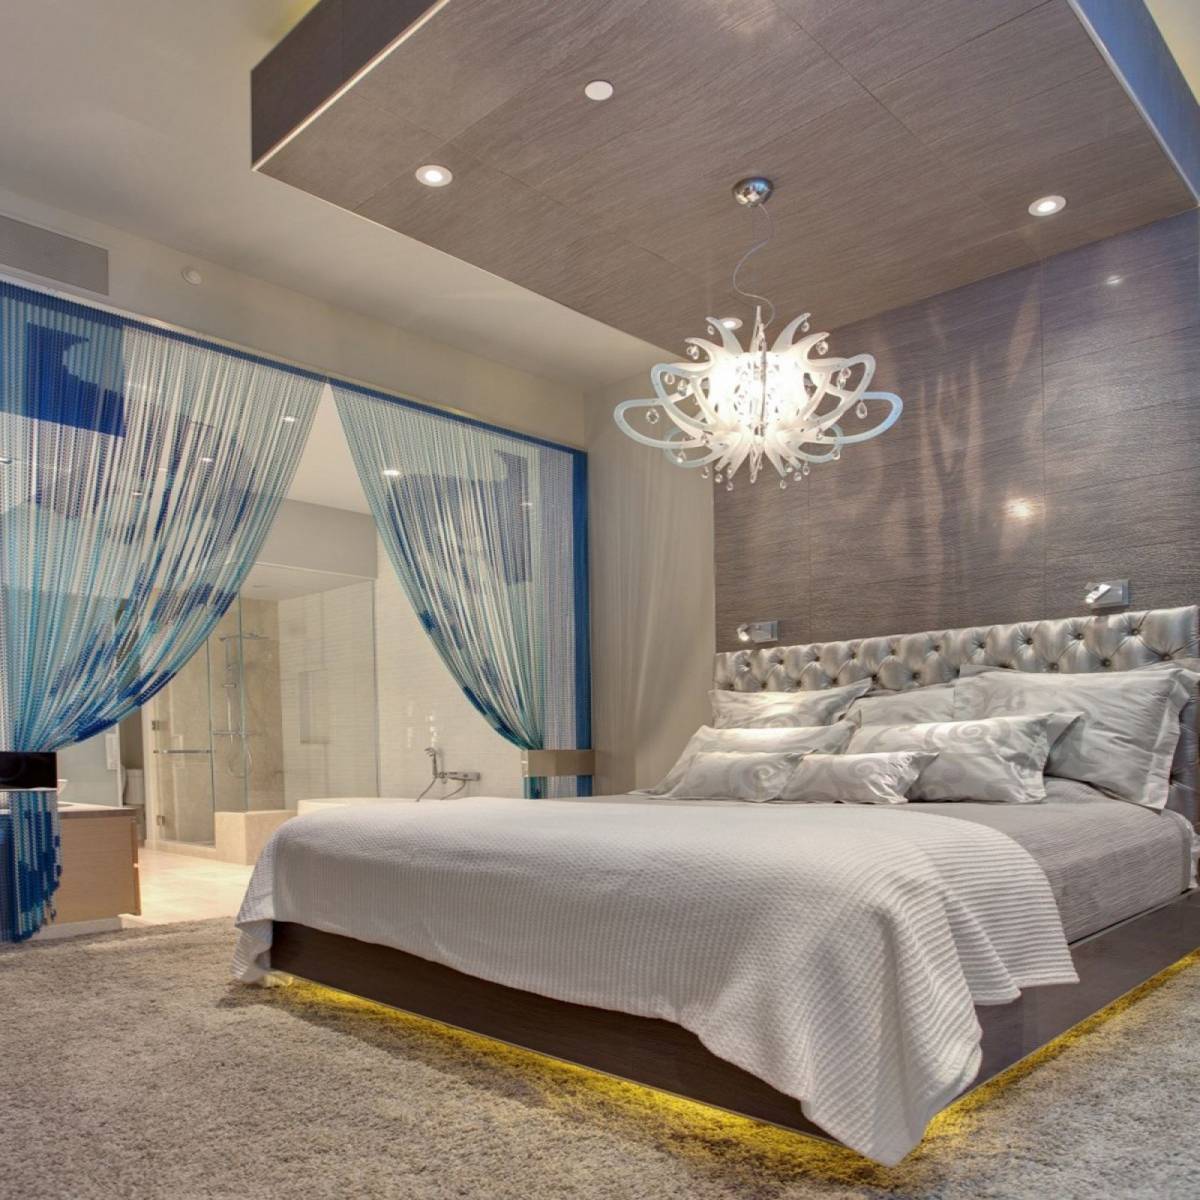 elegant recessed lighting on wooden ceiling design with beautiful chandelier above low king size bed